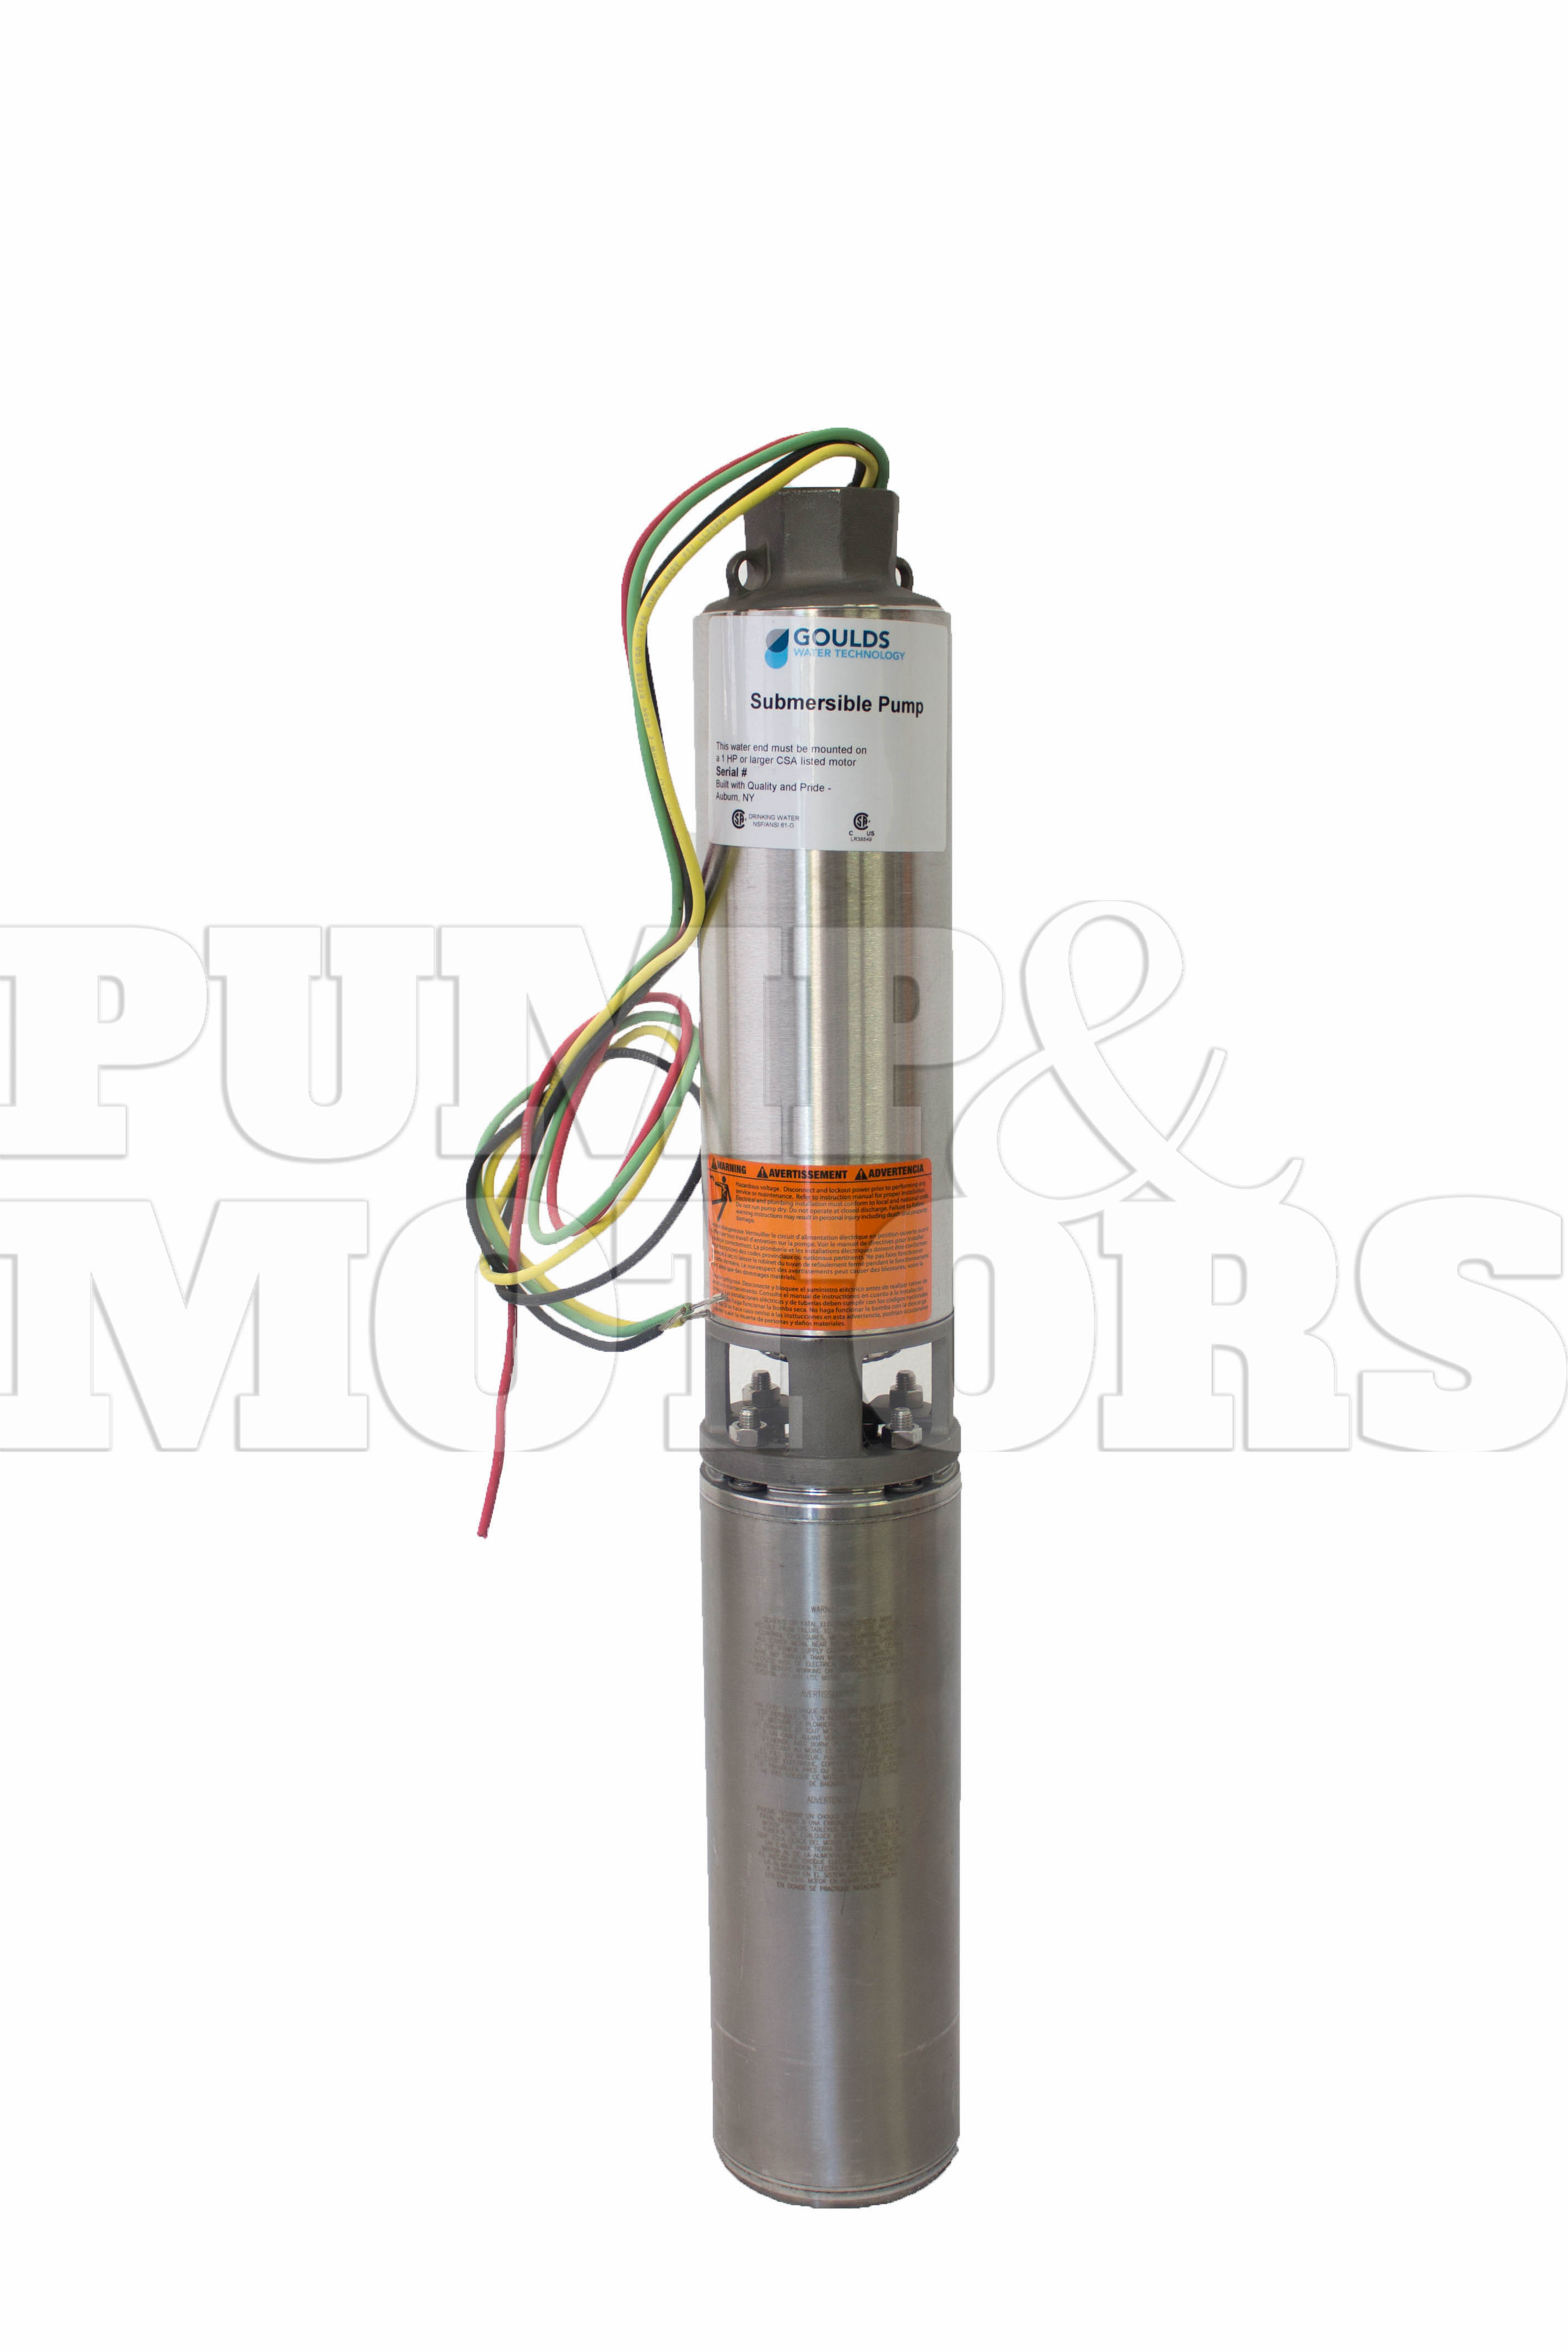 45GS15432C Goulds 45GPM Submersible Water Well Pump 1.5HP